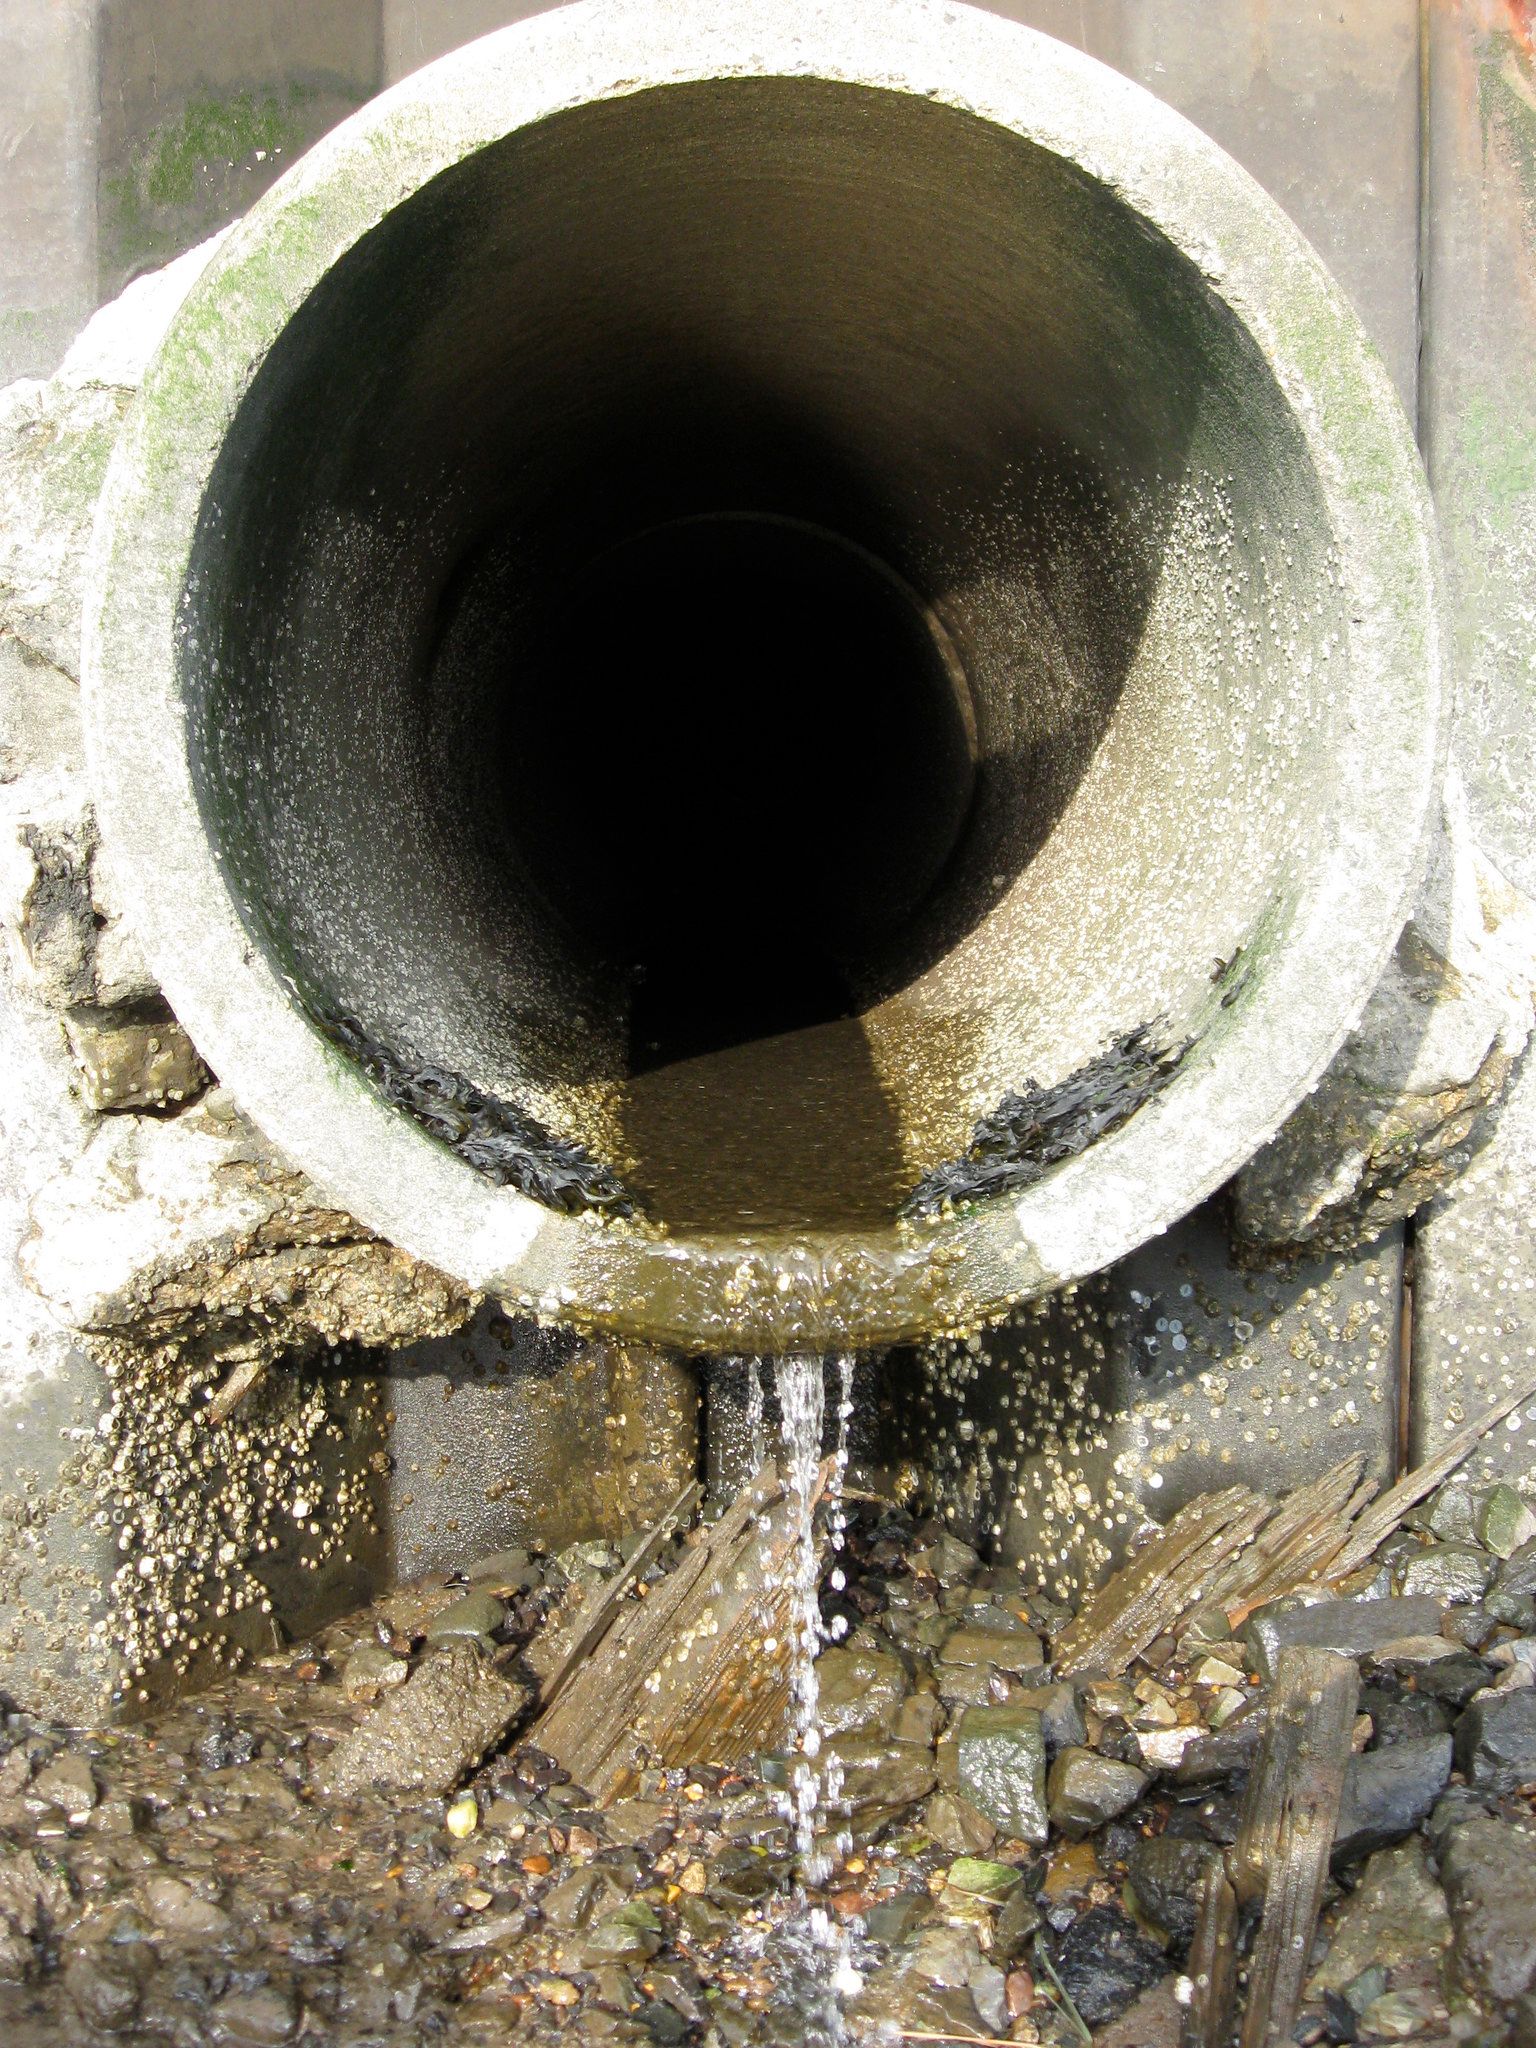 A picture of a sewage drainage pipe